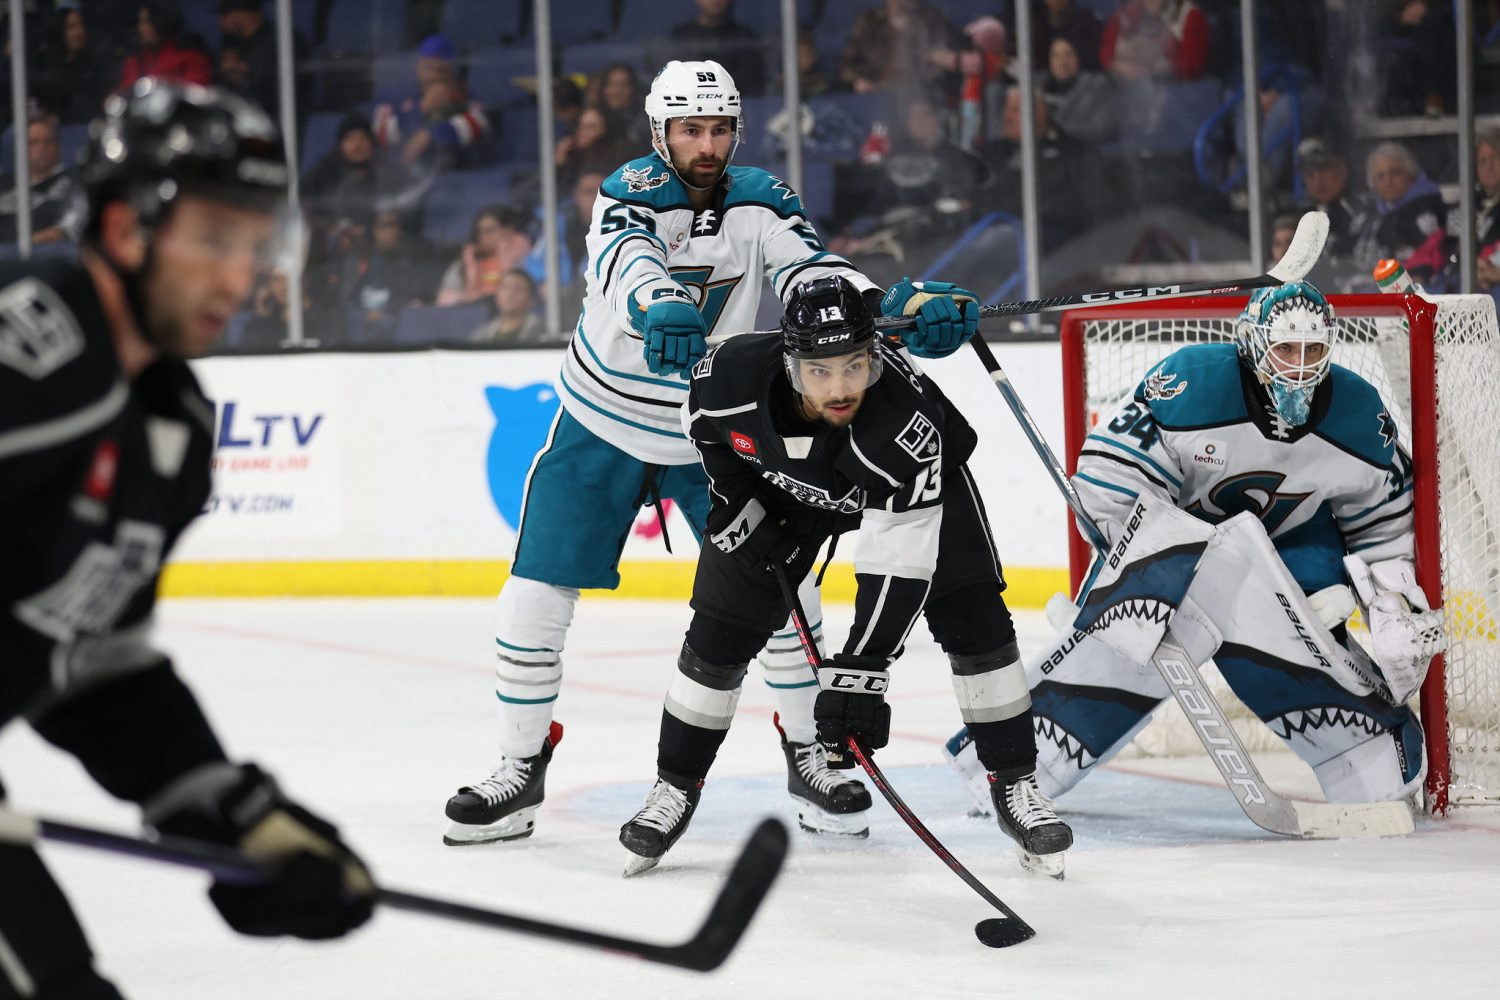 Pregame Notes and Lineup for Ontario Reign Early Morning Game in San Jose